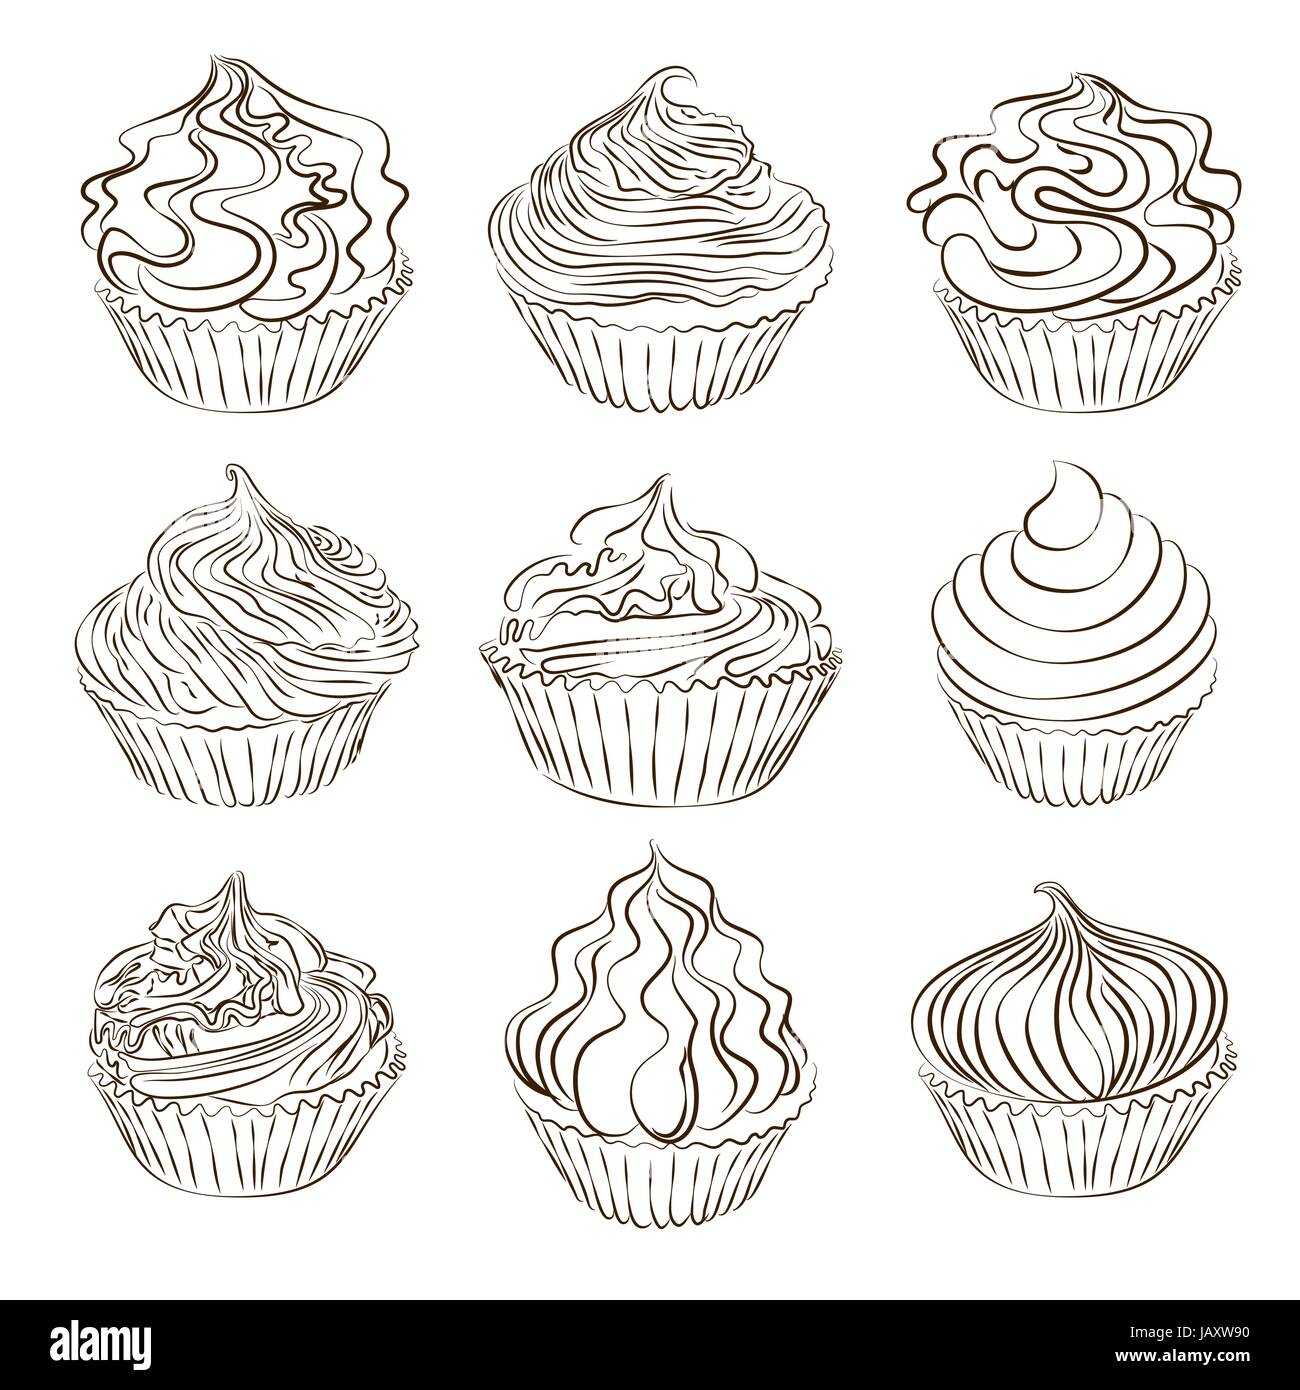 How to Draw a Cupcake Easy drawings - YouTube